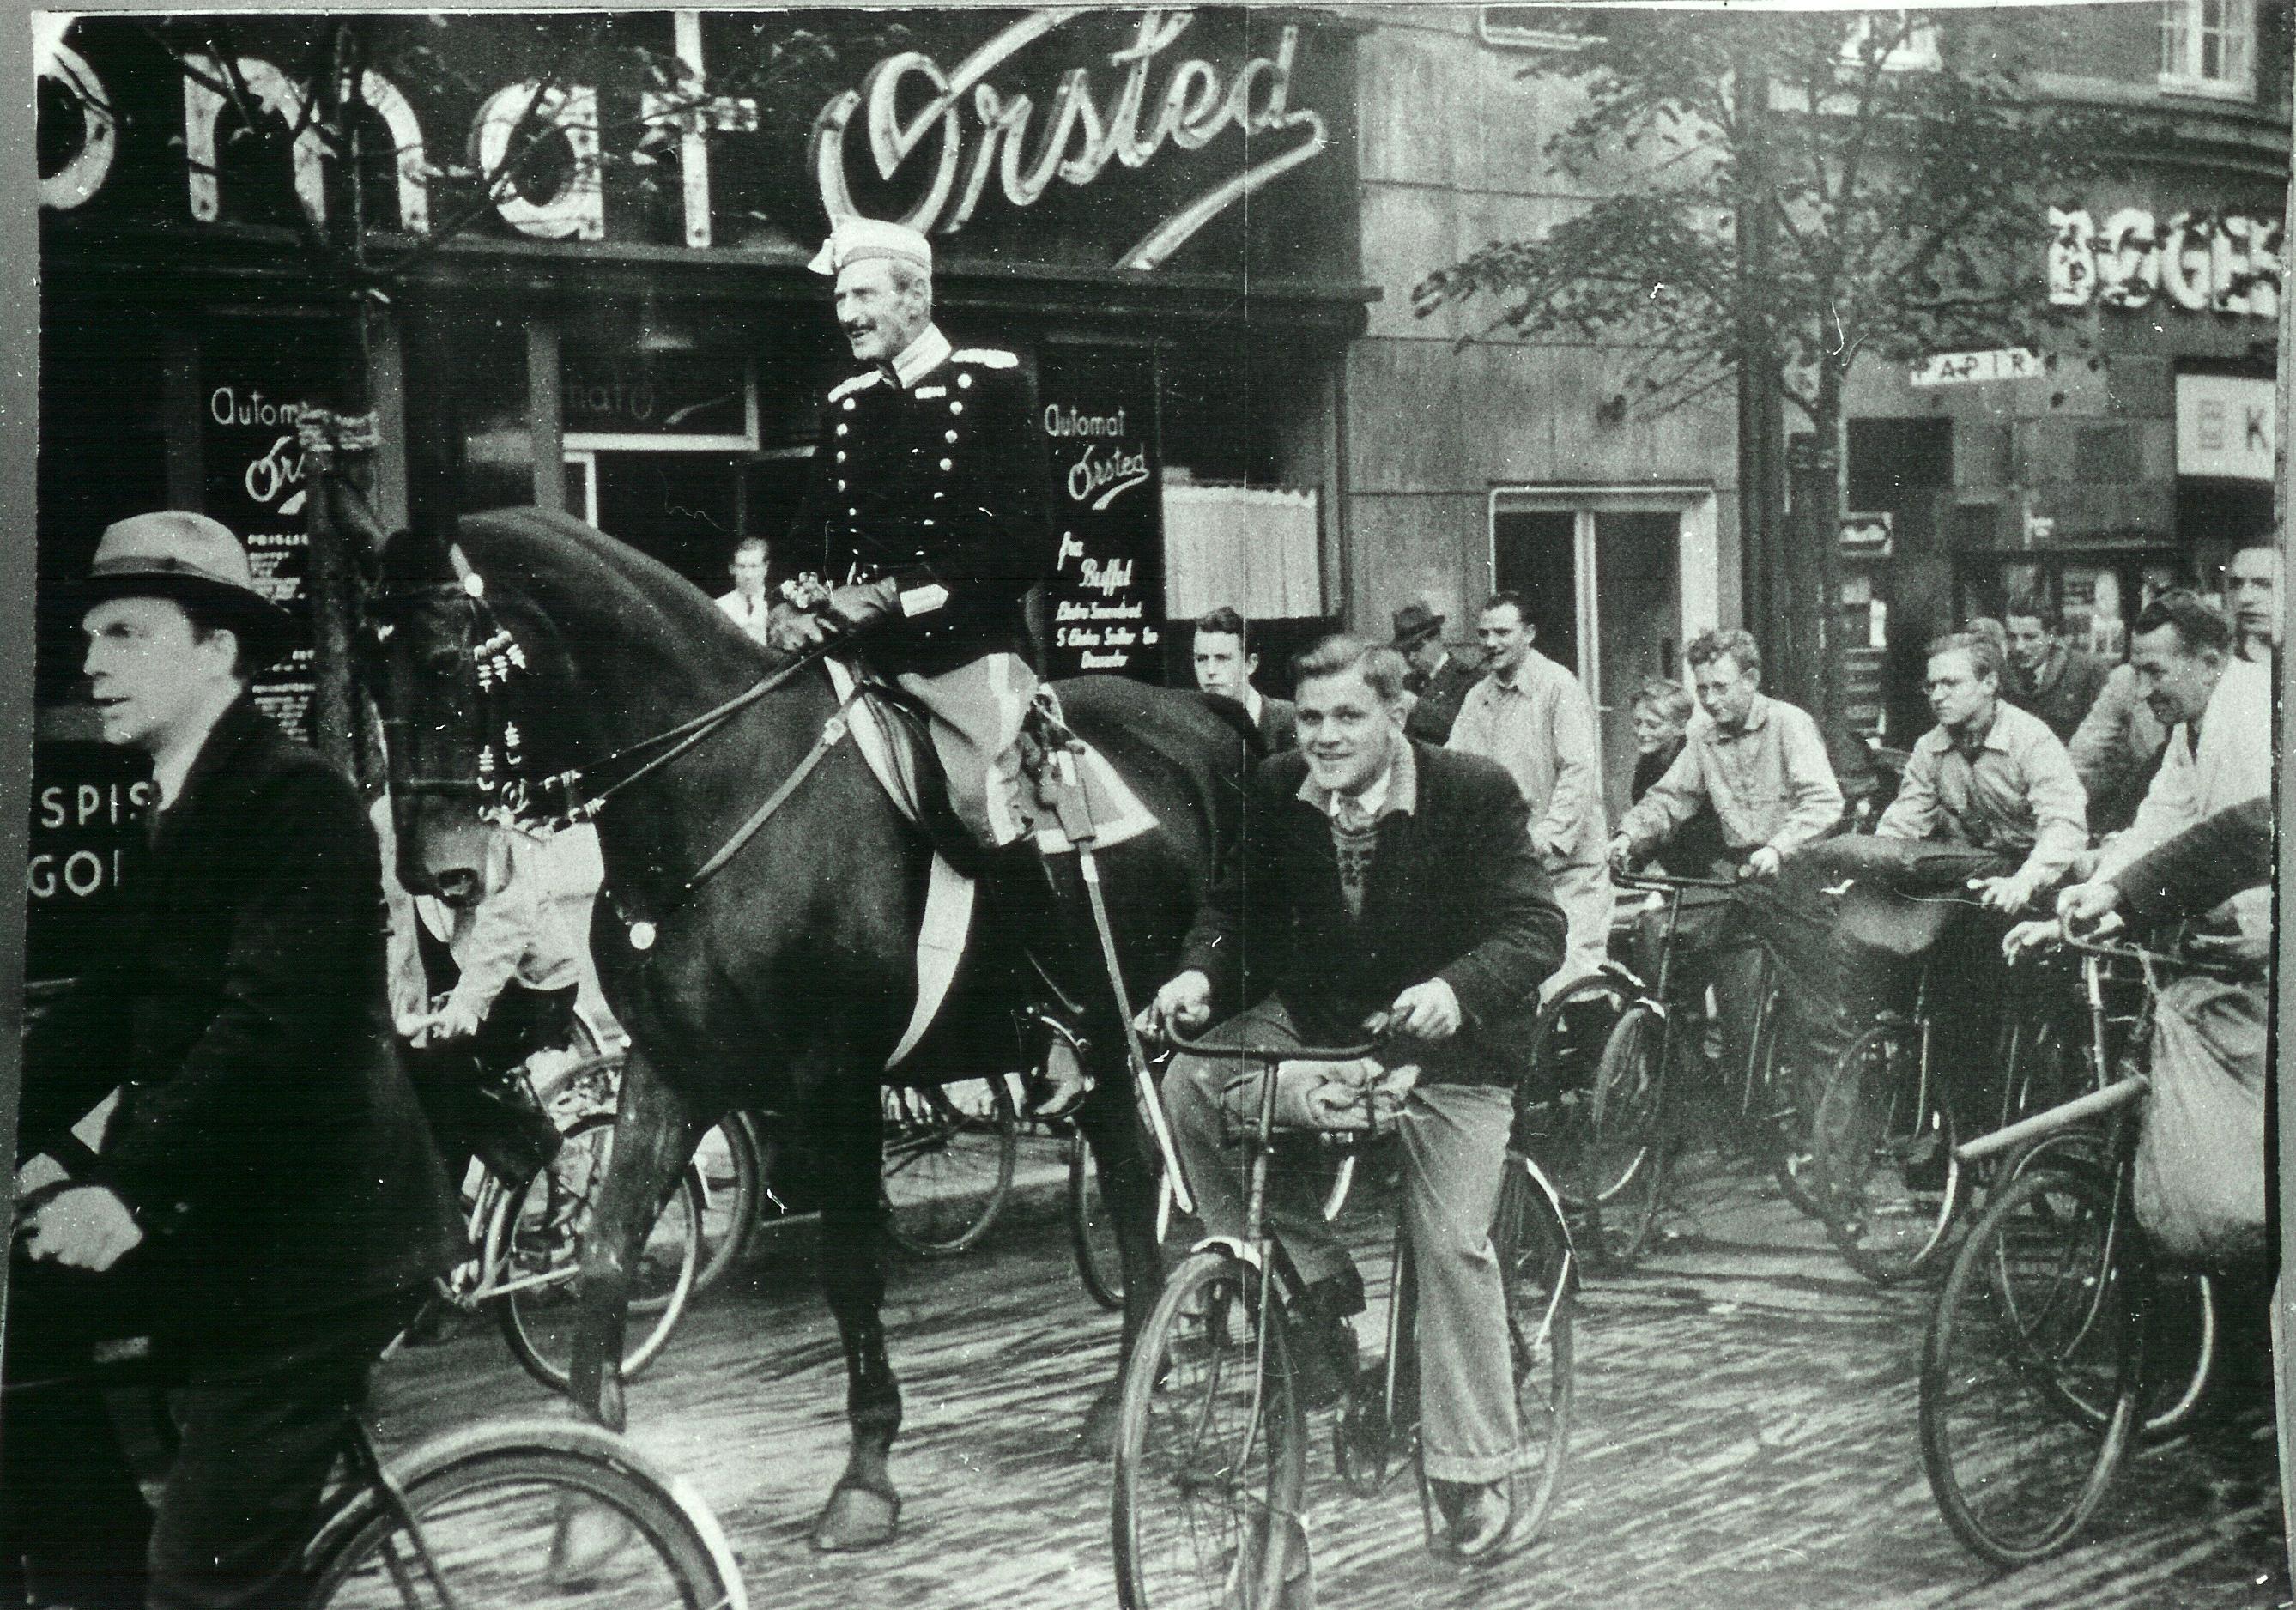 King Christian X of Denmark enjoying a bike ride after having hypnotized his horse into thinking it is a bicycle (1940).